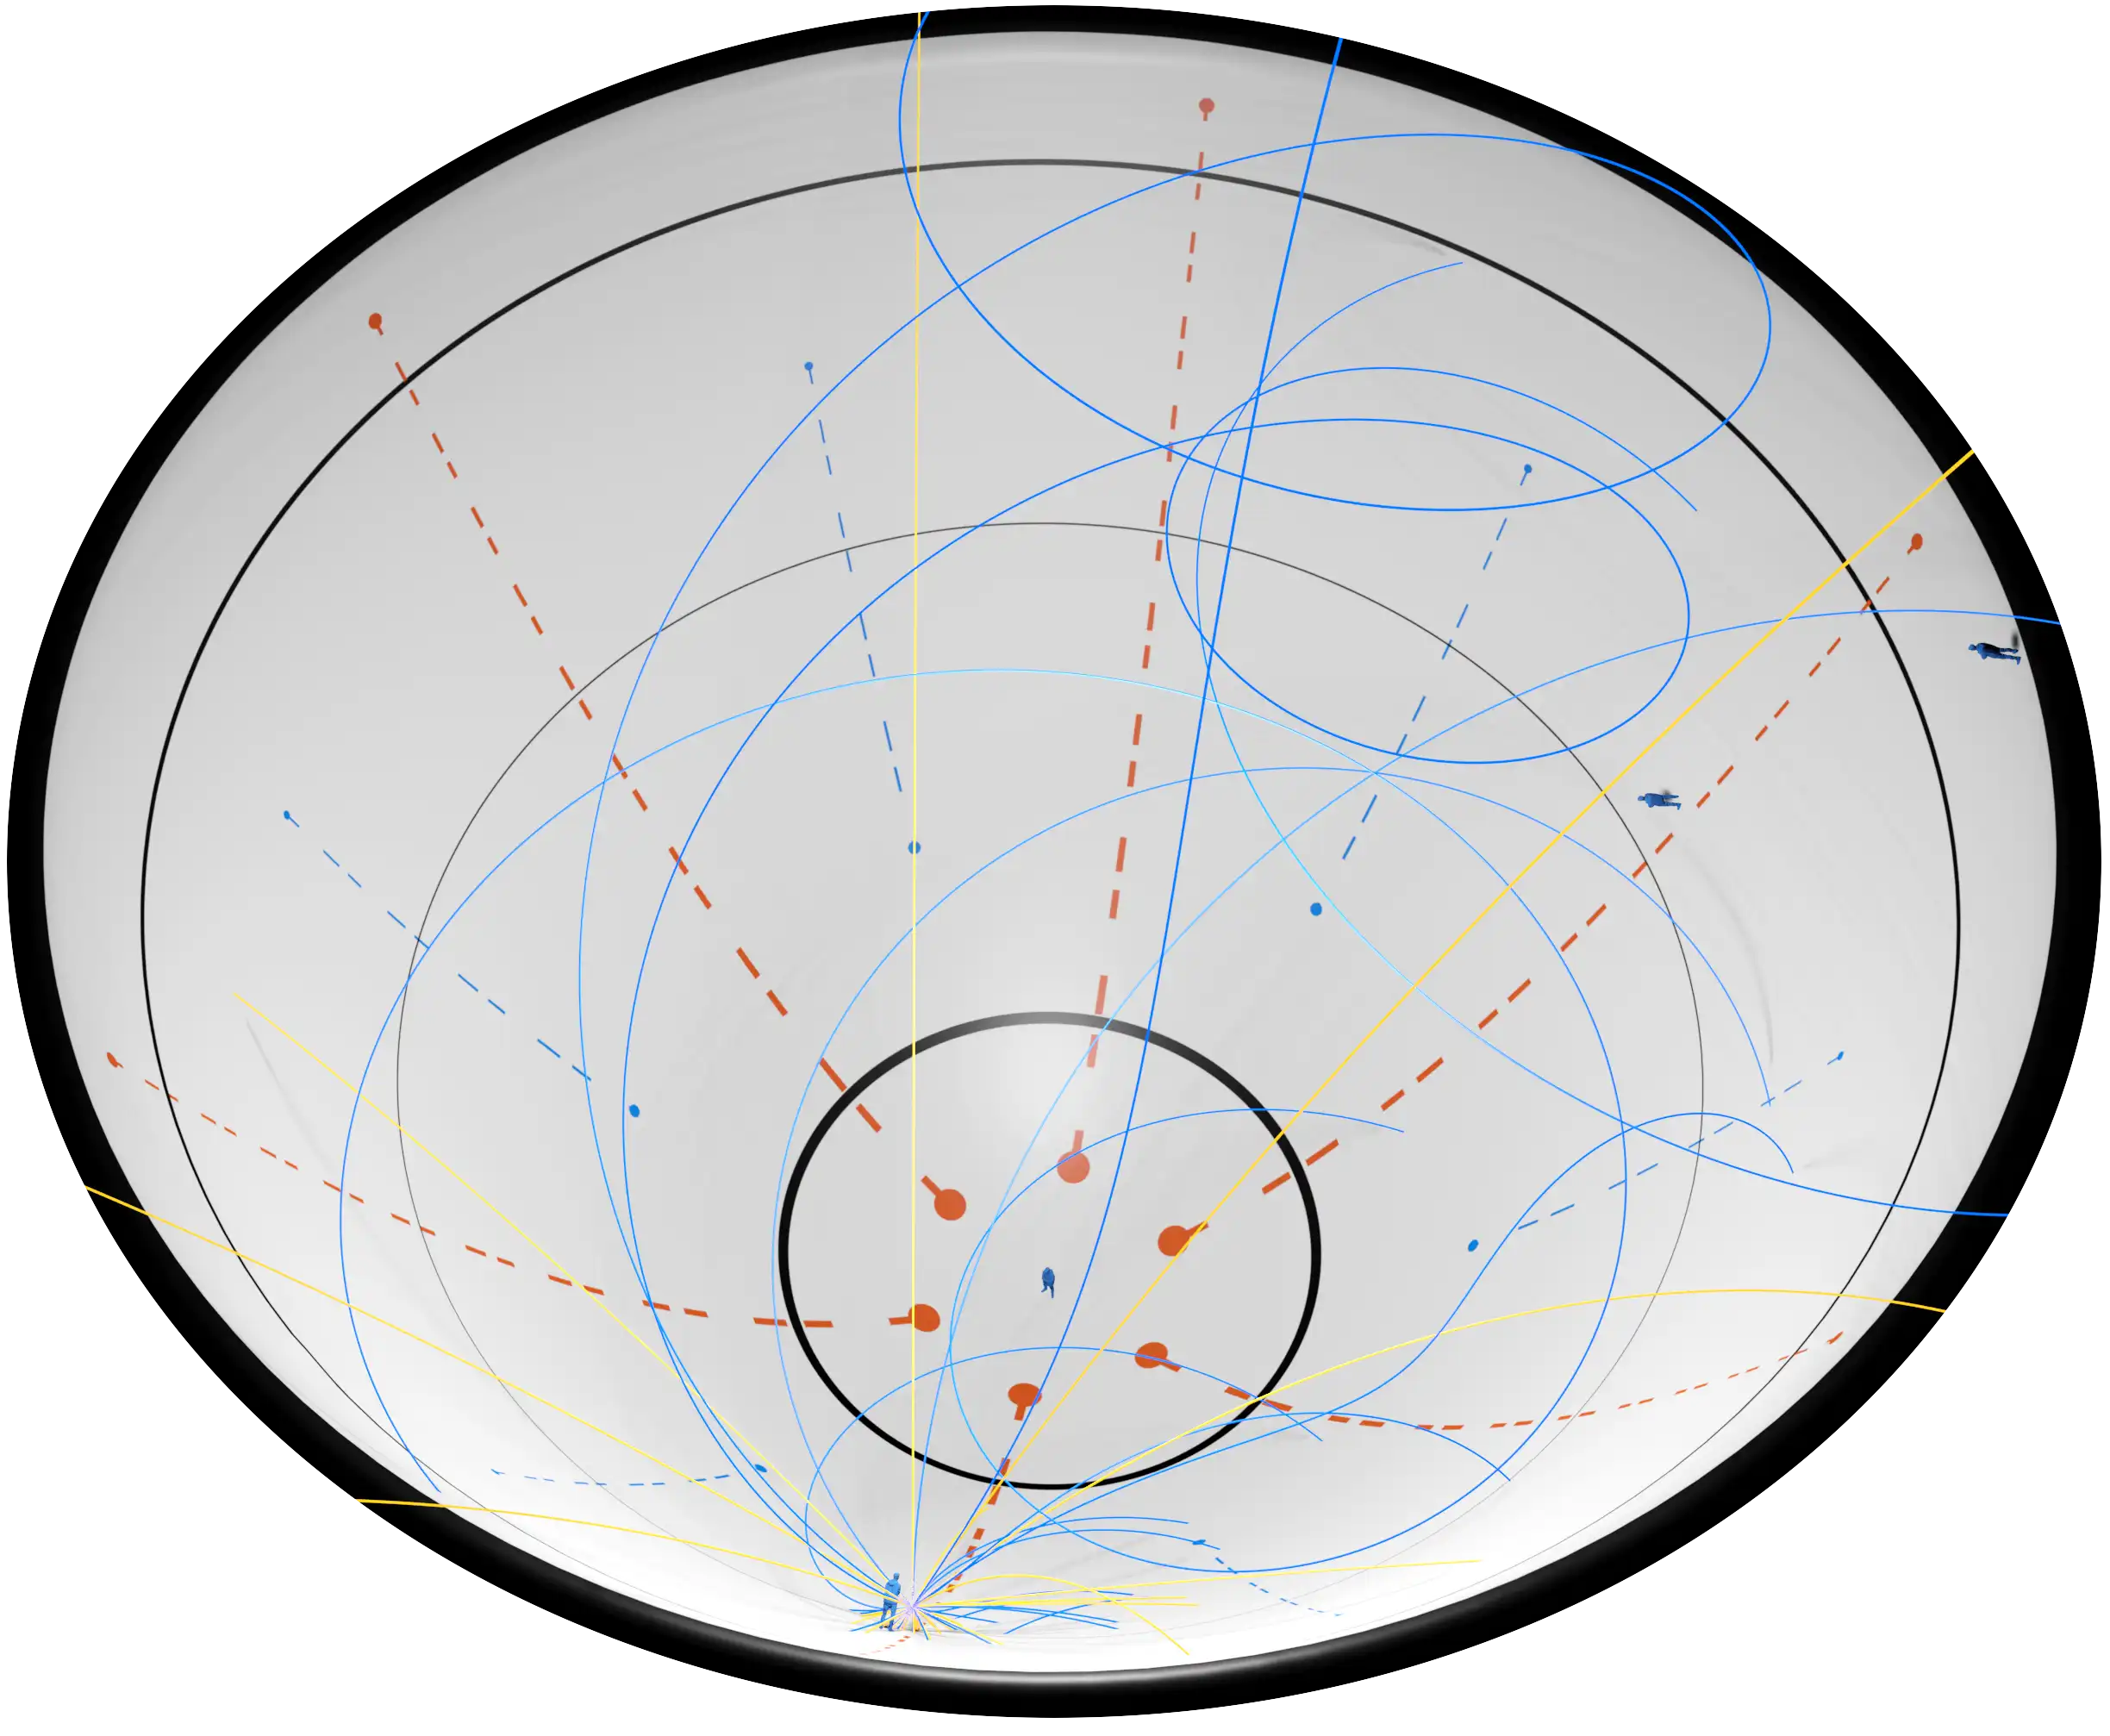  3. Same set of trajectories for fixed (yellow) and rotating (blue) frames of reference.